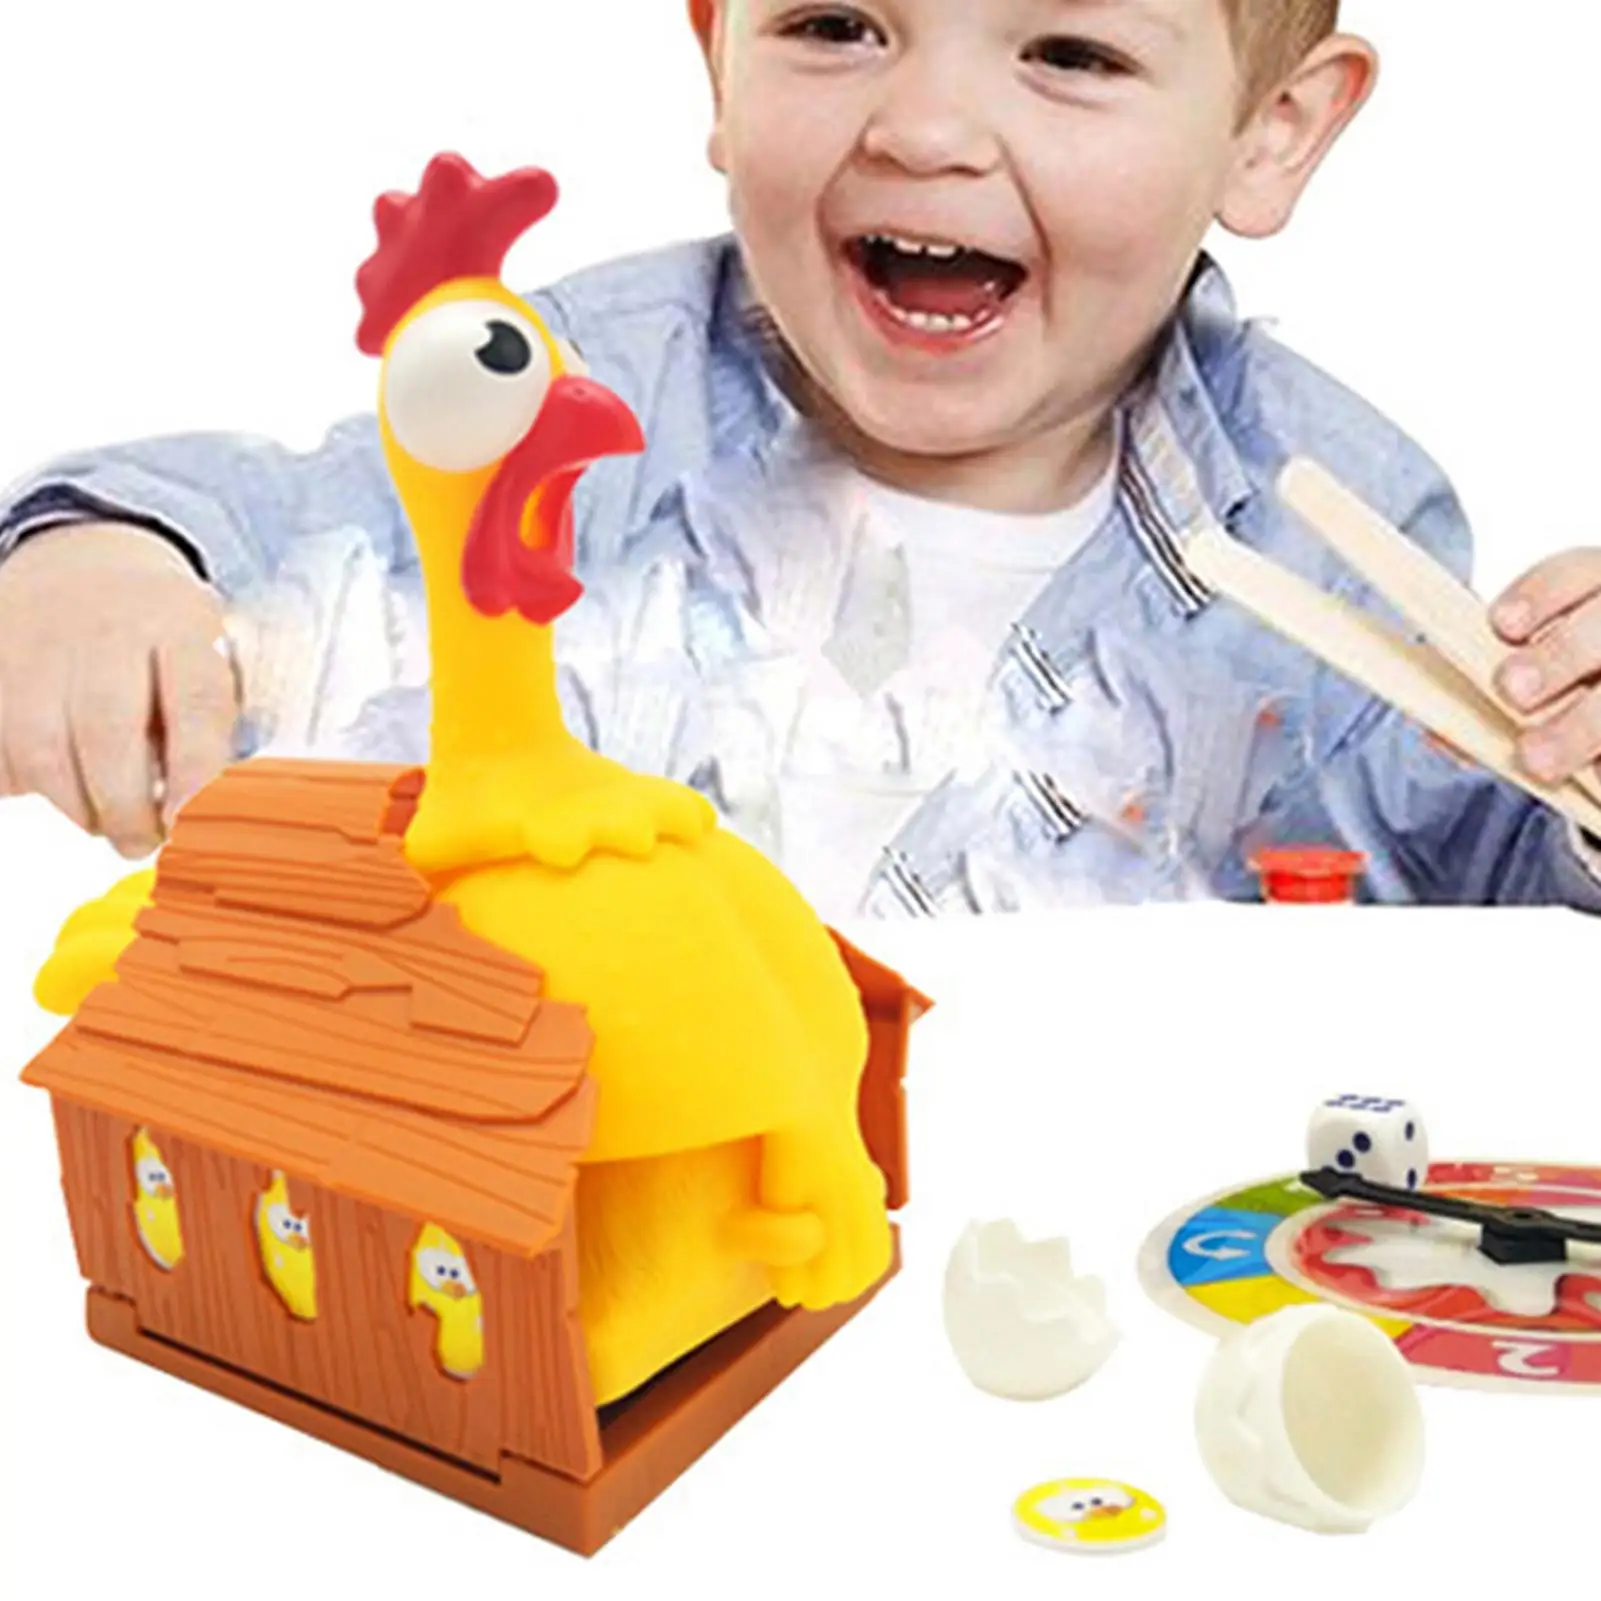 

Squeeze Chicken Egg Laying Hens Anti Stress Toy For Kids Adult Halloween Gifts Tabletop Game Tricky Funny Gadgets Party Prank